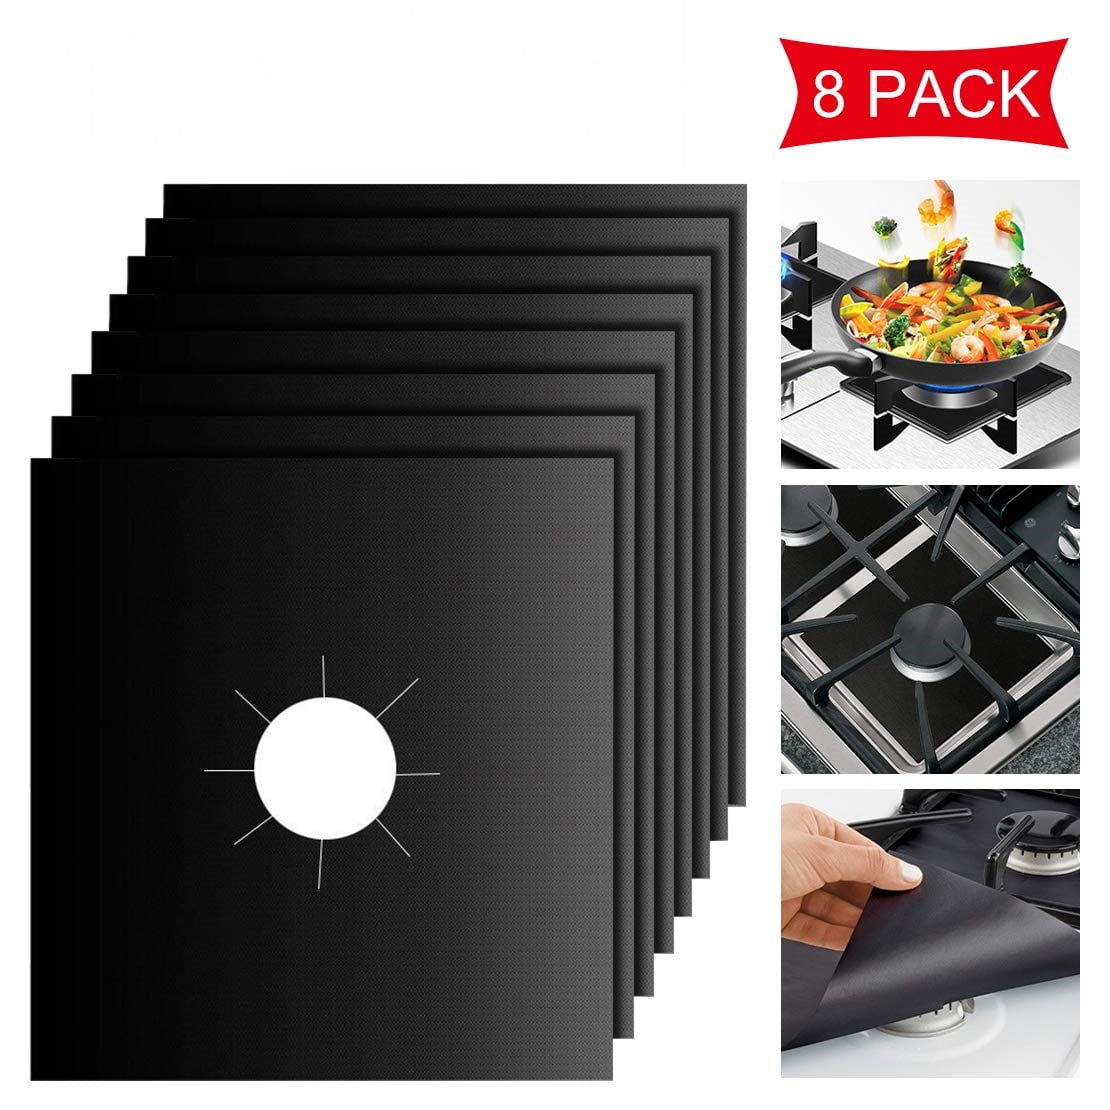 10Pcs Gas Hob Range Protectors Non Stick Gas Stove Burner Covers Reusable Cooker Protector 0.2mm Double Thickness Gas Stove Mats for Kitchen Easy to Clean Dishwasher Safe Silver 